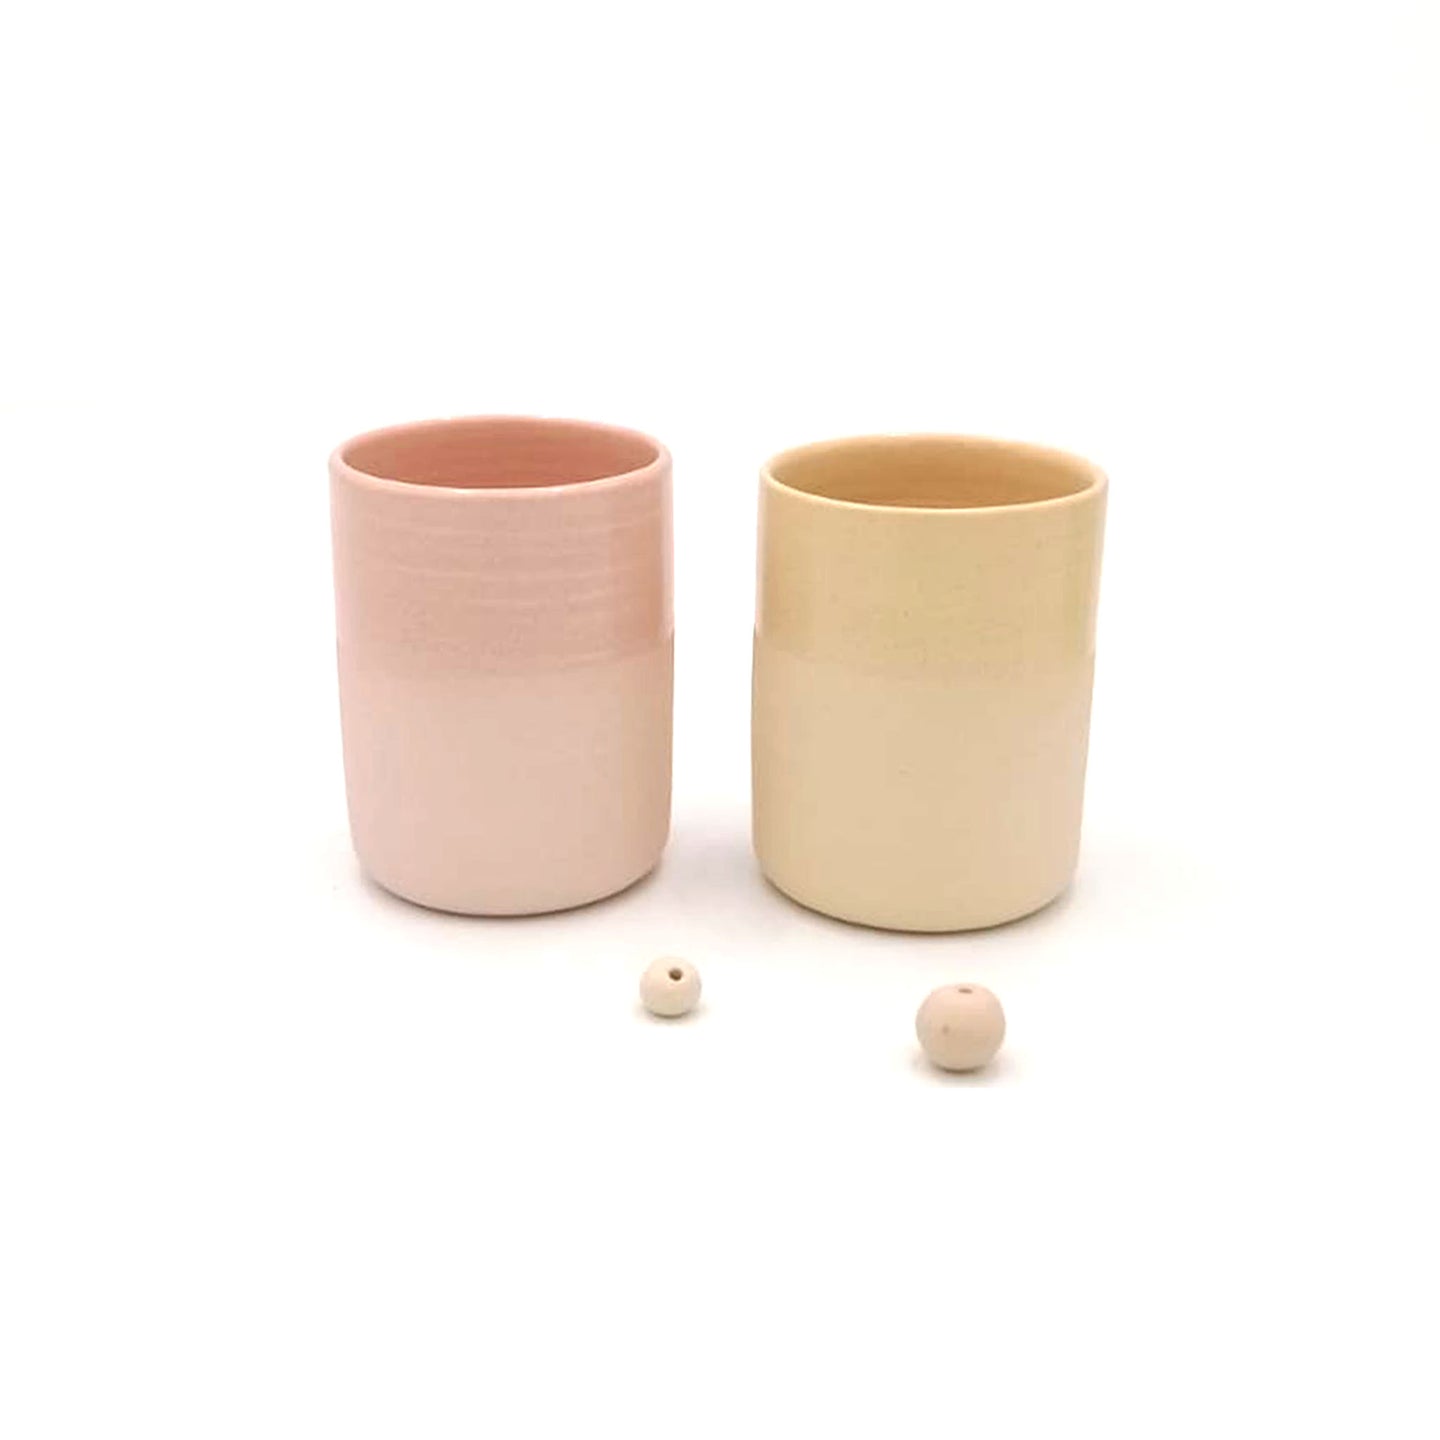 Tumblr Cups - Set of 2